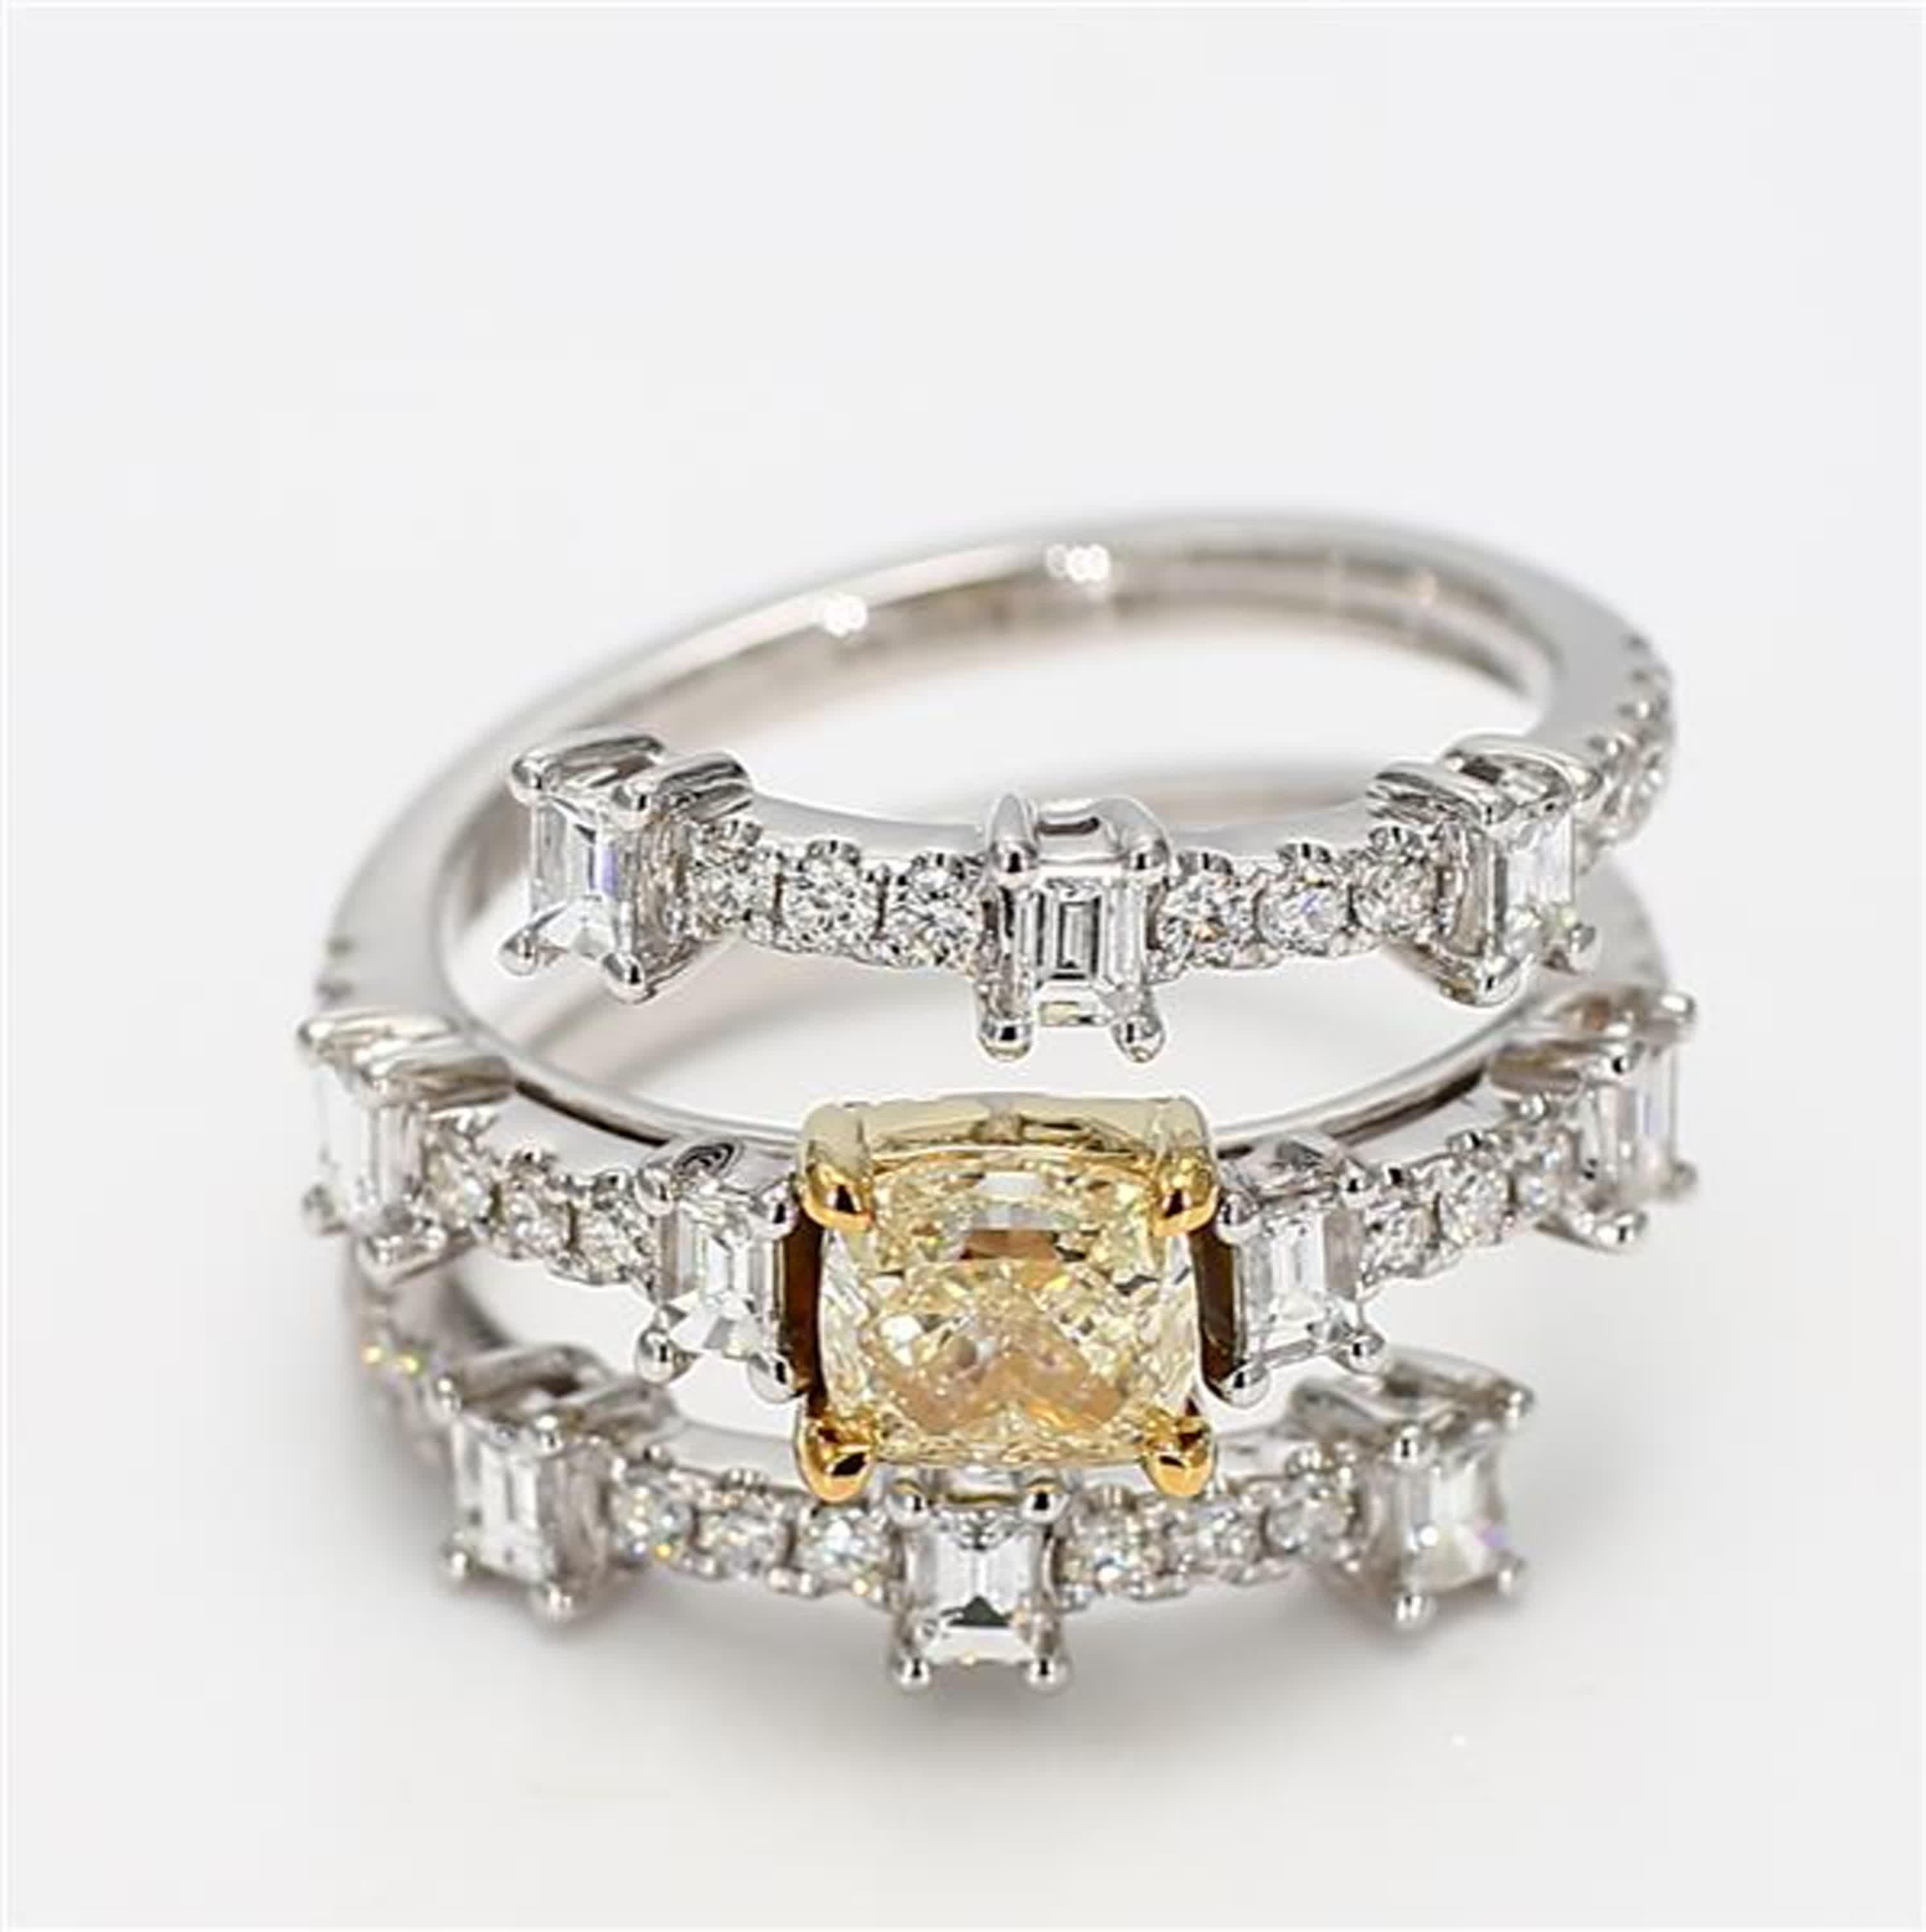 RareGemWorld's classic GIA certified diamond ring. Mounted in a beautiful 18K Yellow and White Gold setting with a natural cushion cut yellow diamond. The yellow diamond is surrounded by natural baguette cut white diamonds and round natural white